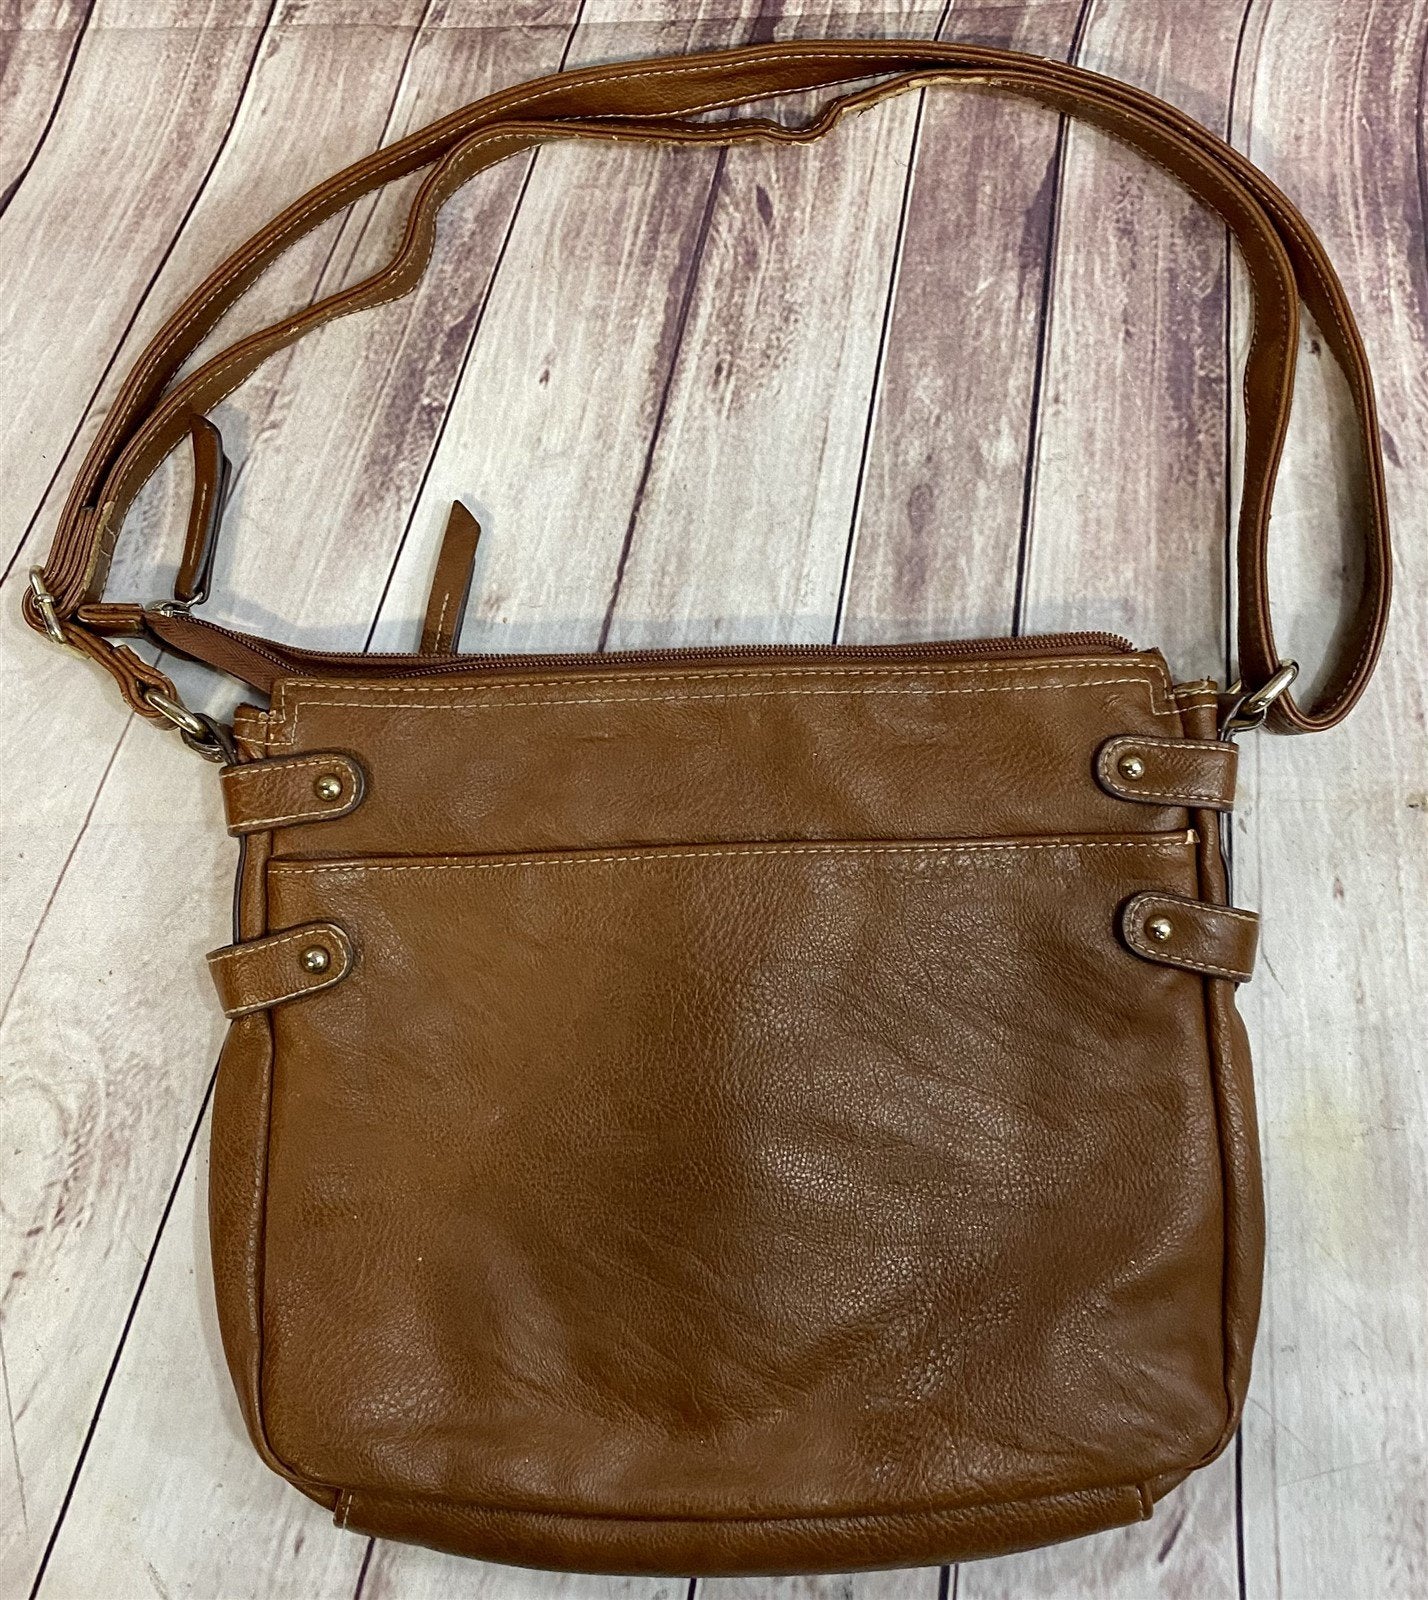 Medium Brown w / Gold Hardware Saddlebag Type Vintage Purse by Style and Co.